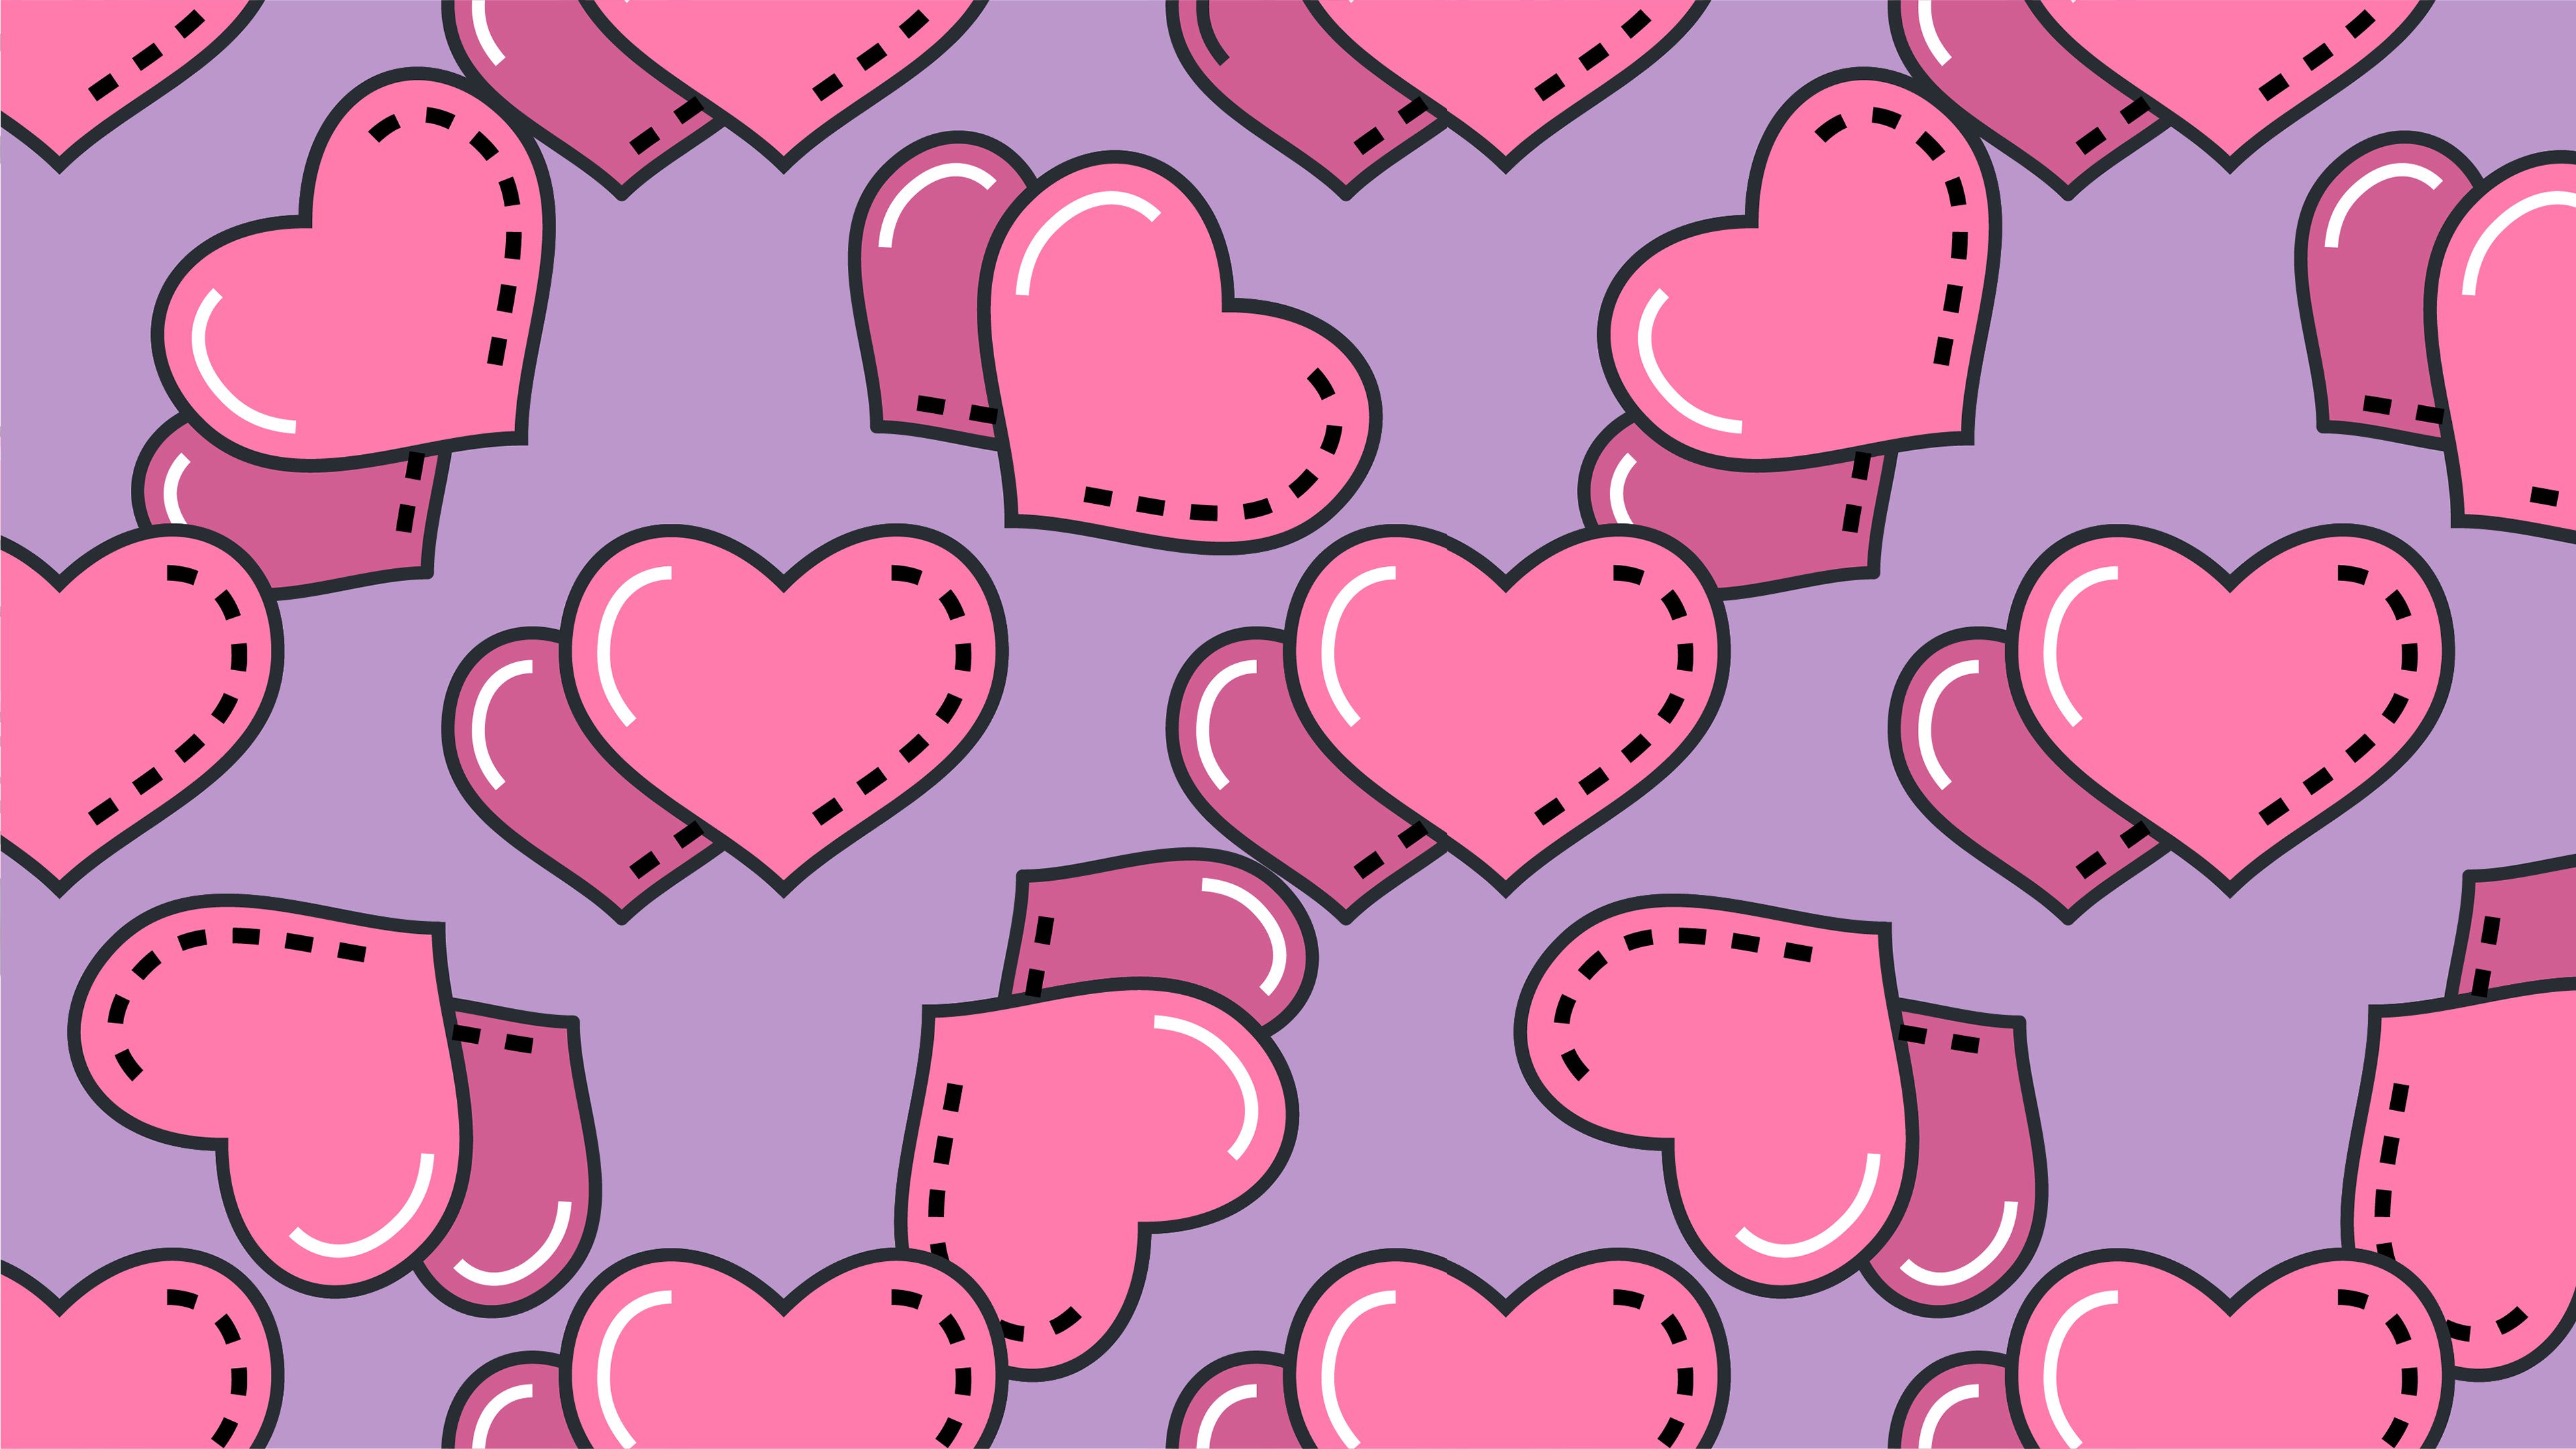 Cute Valentines Day Wallpaper For Chromebooks (3840x2160). Valentines wallpaper, Wallpaper edge, Chromebook